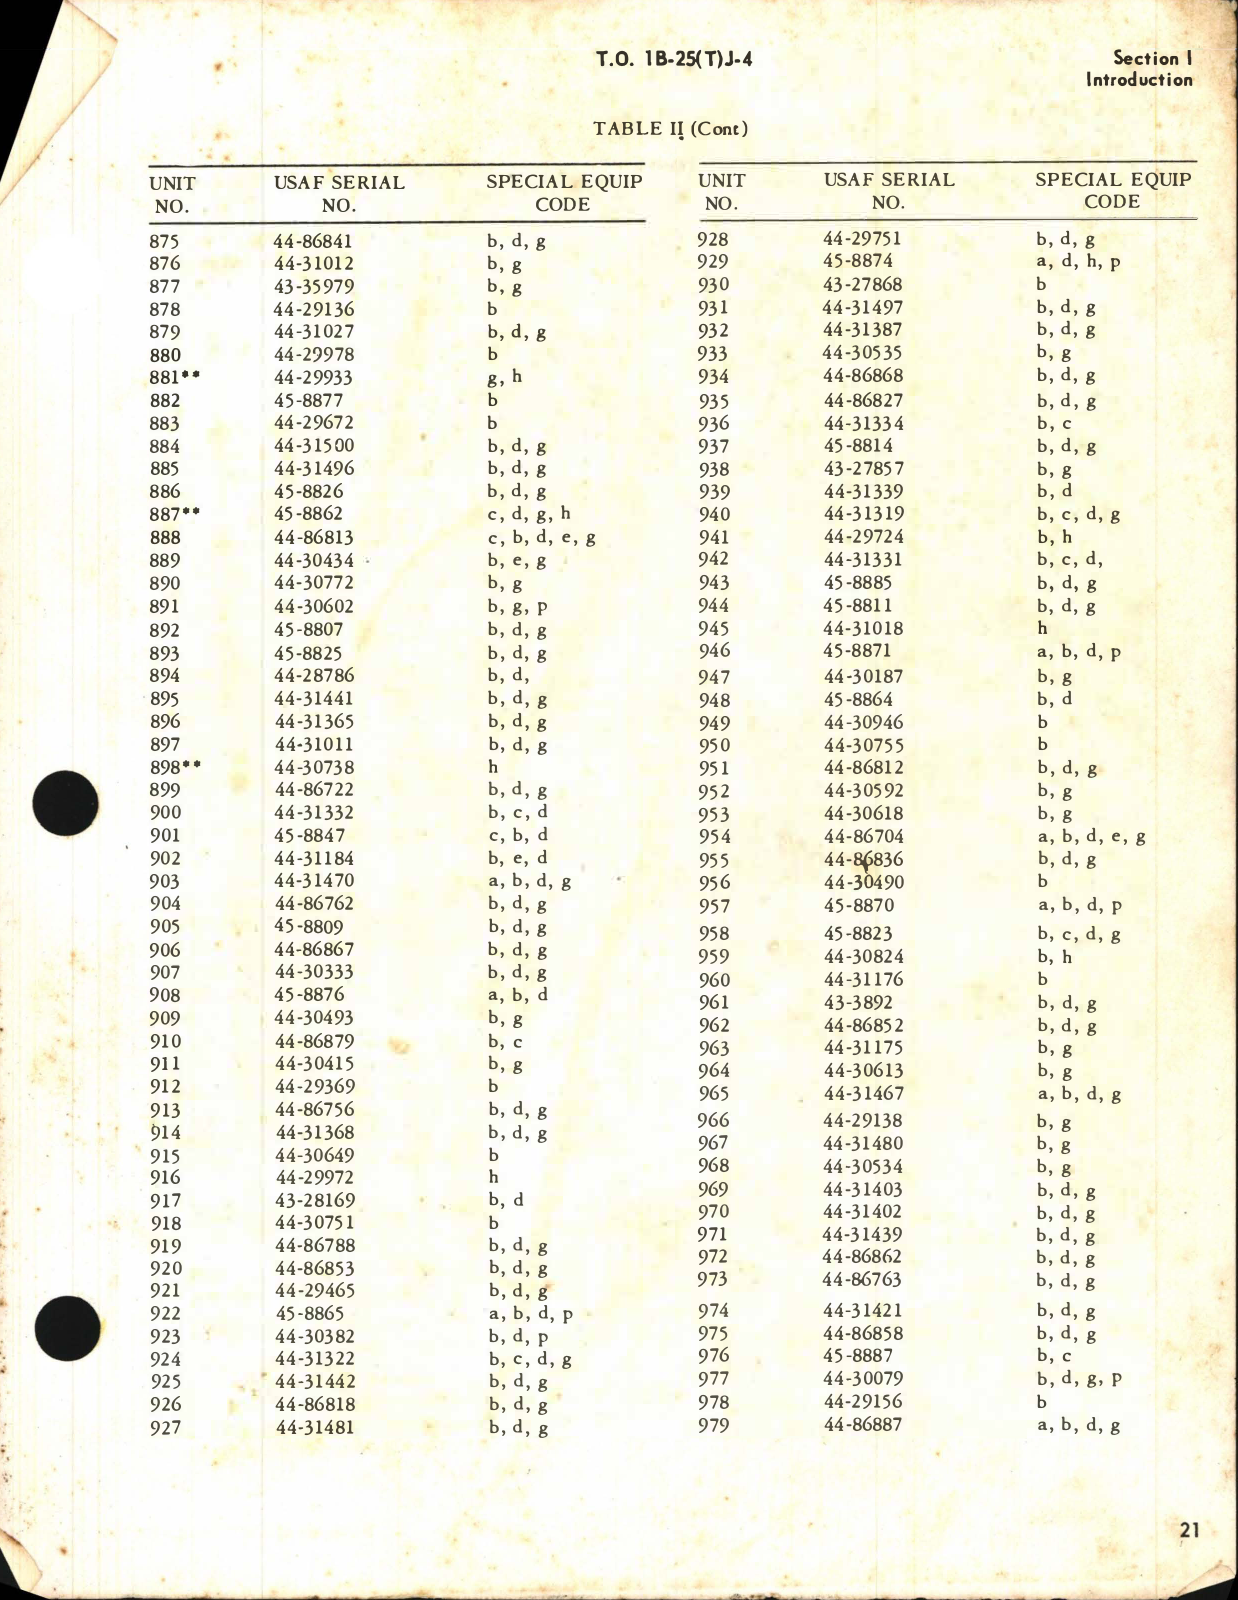 Sample page 17 from AirCorps Library document: Illustrated Parts Breakdown for B-25J, TB-25J, TB-25L, TB-25L-1, and TB-25N